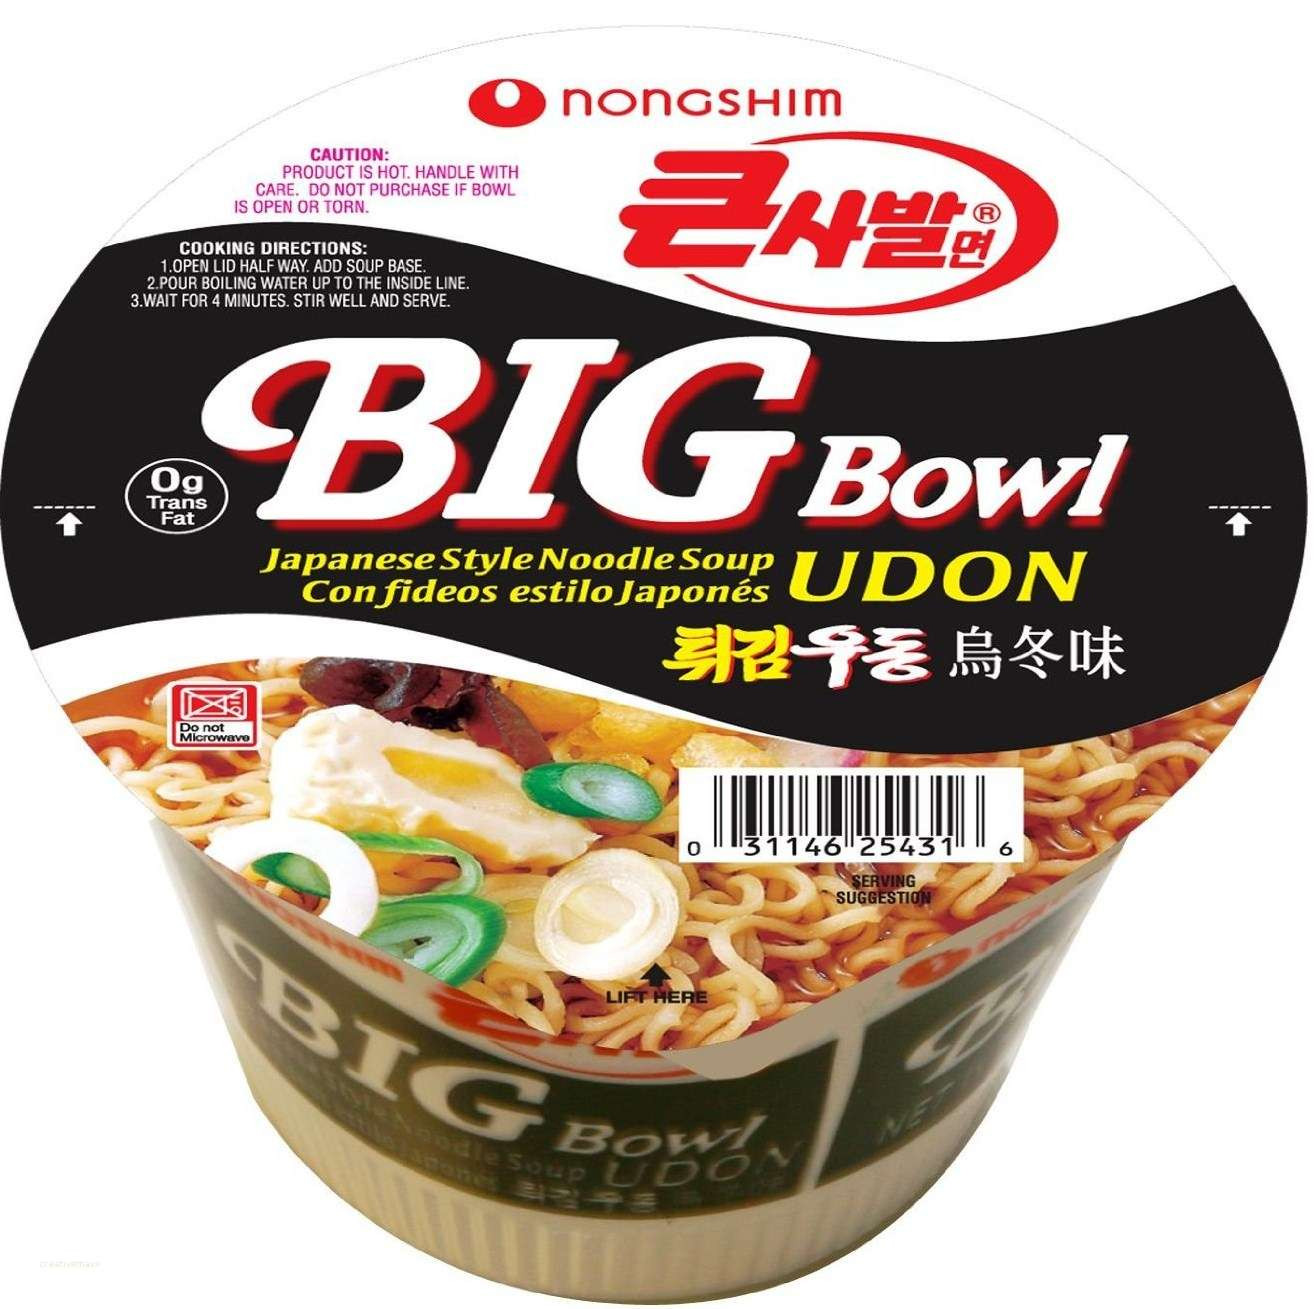 Microwave Cup Noodles
 can you microwave nissin cup noodles